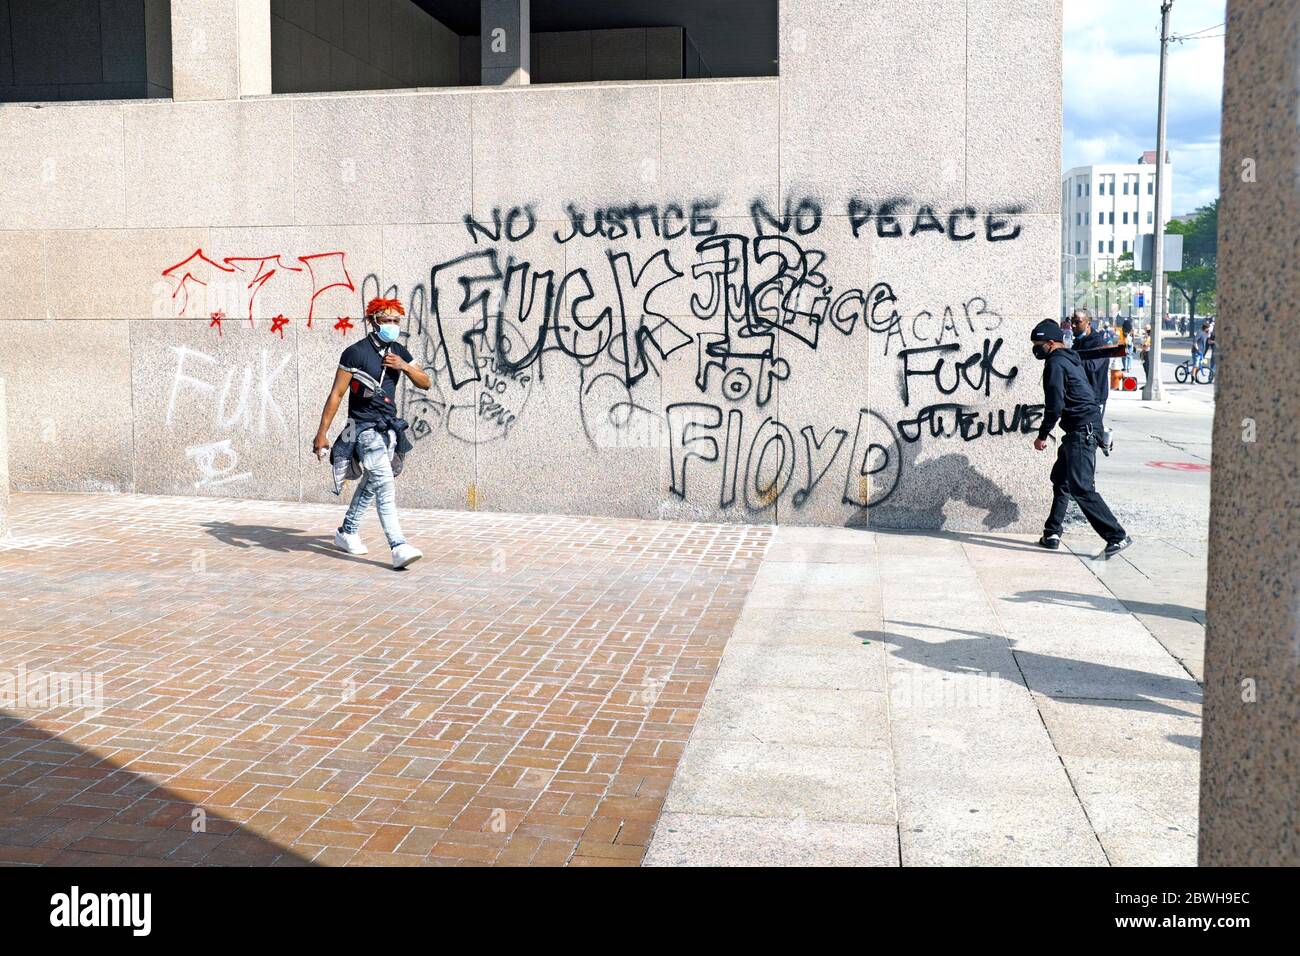 Protesters graffiti a wall at the Cleveland Justice Center in Cleveland, Ohio during George Floyd protests on May 30, 2020. Stock Photo